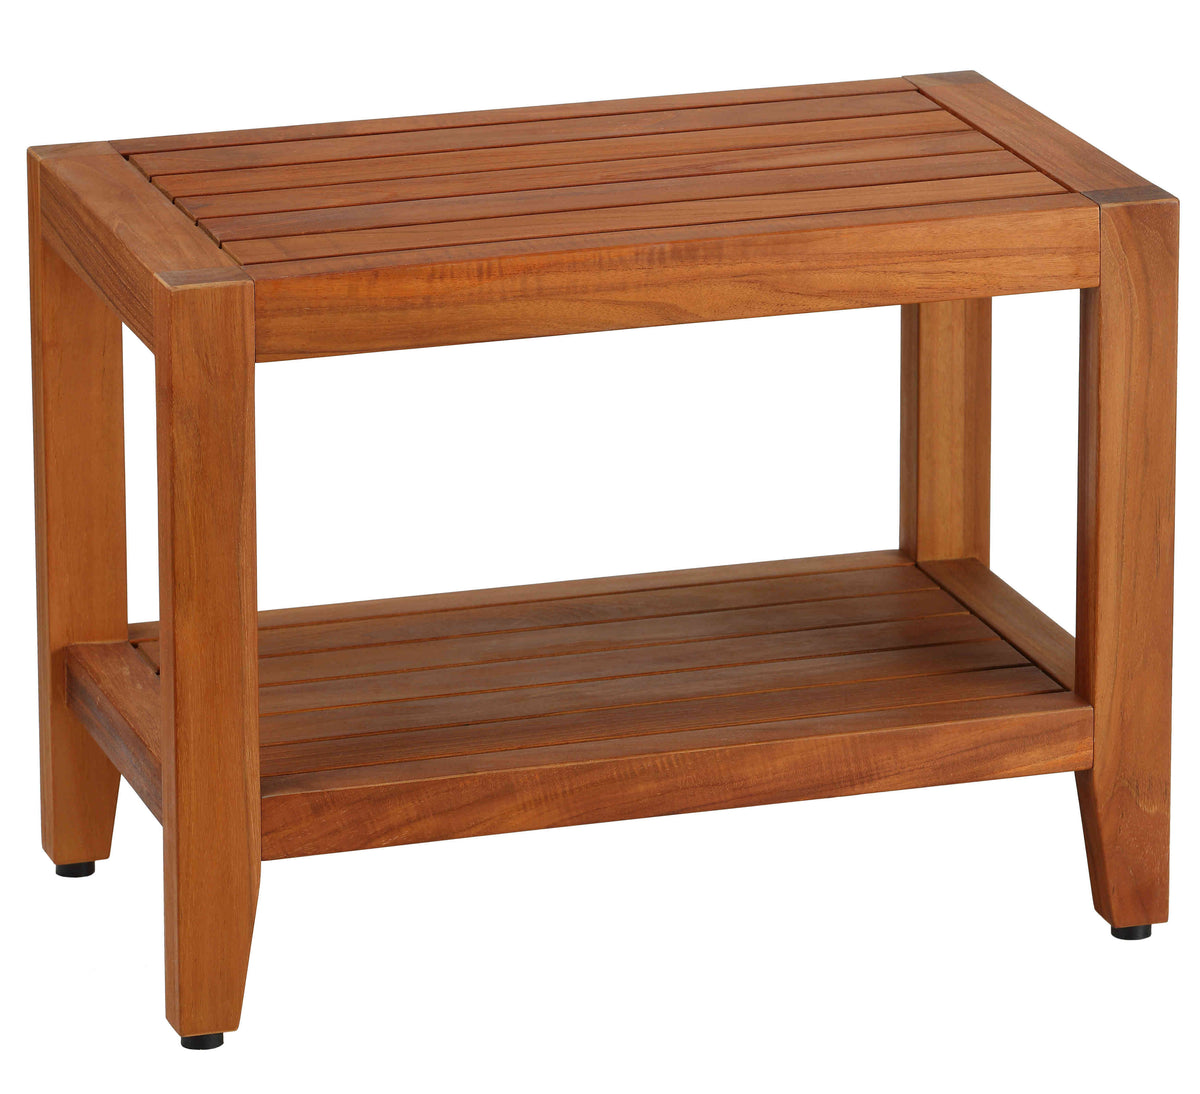 Bare Decor Serenity Spa 24&quot; Bench with Shelf in Solid Teak Wood